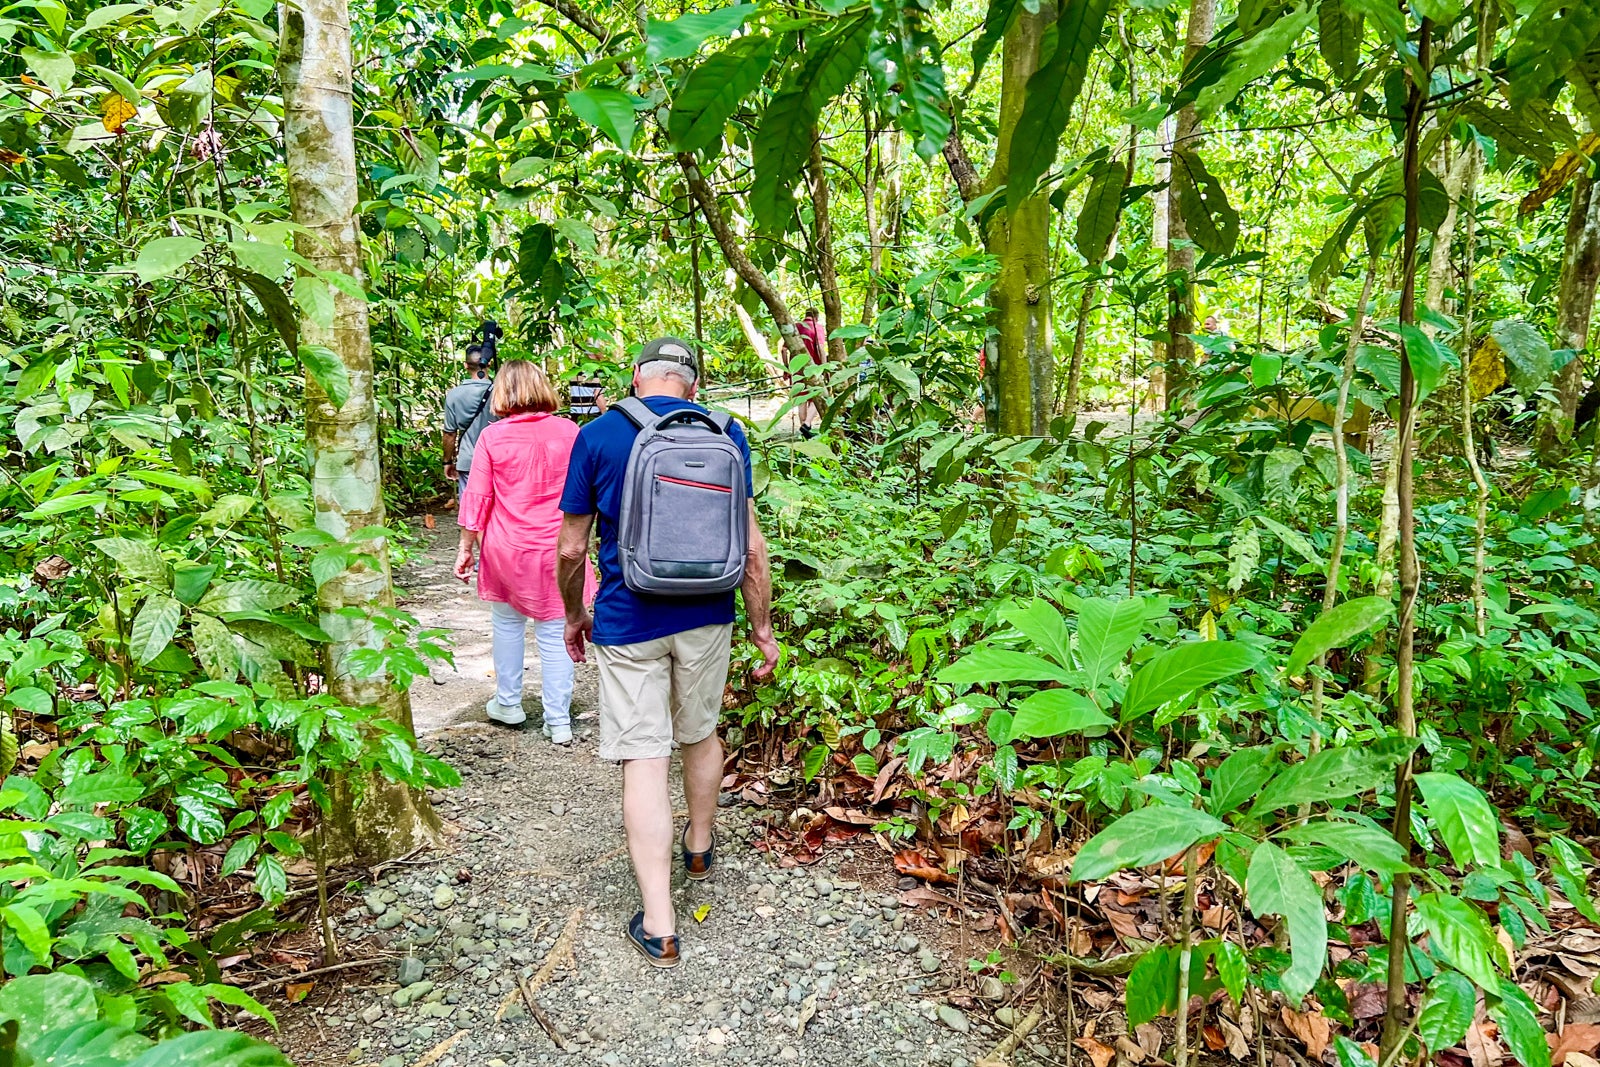 Searching for sloths in Costa Rica